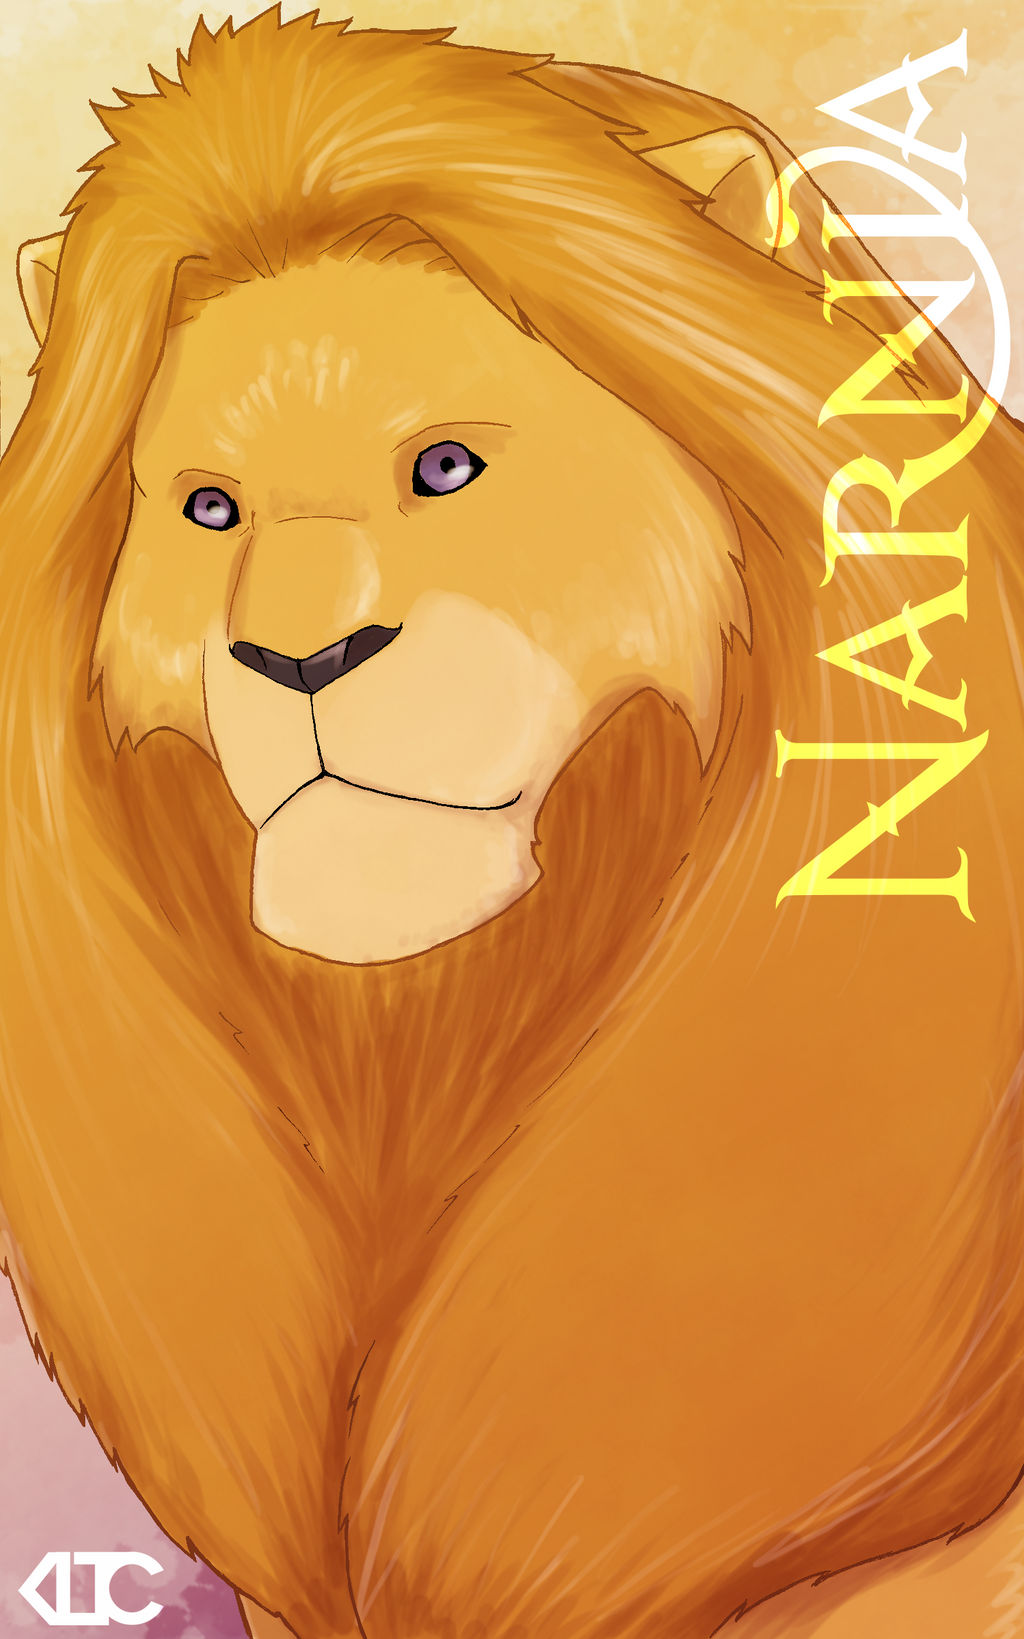 Aslan from The Chronicles of Narnia Art Print by E Felix - Fine